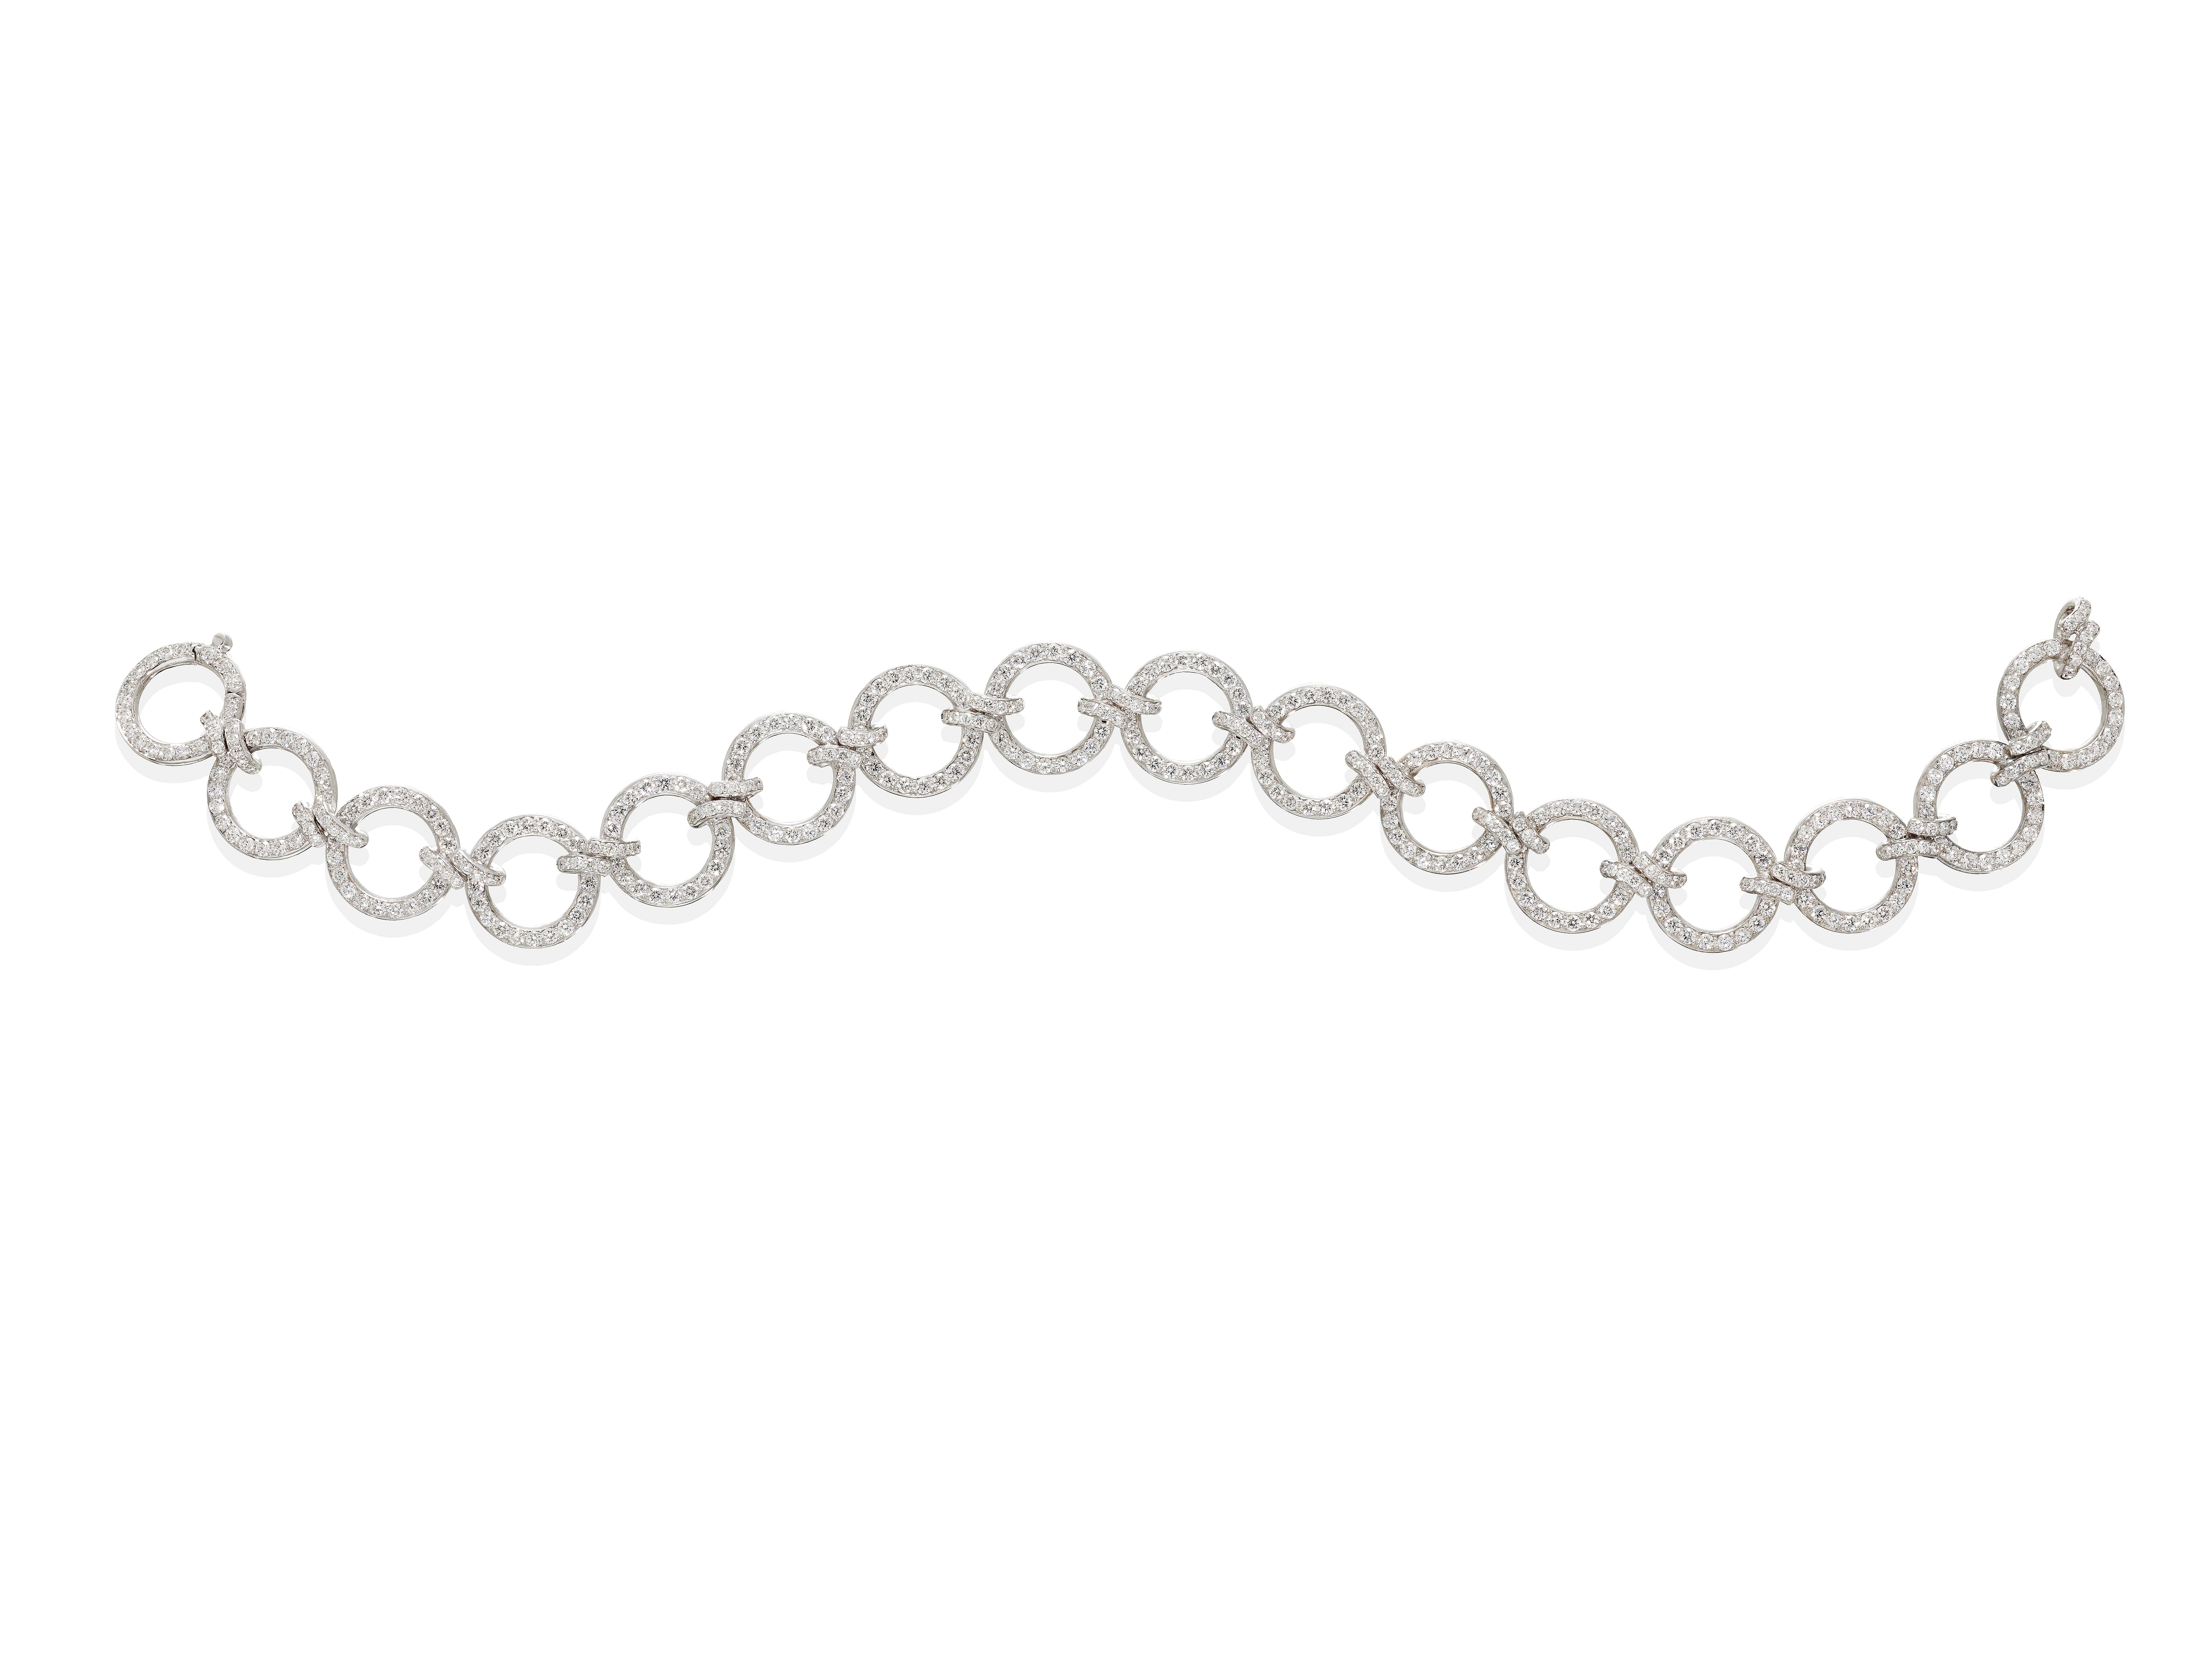 A link bracelet by Rosior set in White Gold with 451 Natural Diamonds weighing 3,39 ct. 
Brilliant Cut Diamonds certified by IGI as D-VVS1.
Weight in 19.2K Gold:  20.9 g.
Unique piece.
This unique piece comes with a Certificate of Authenticity.